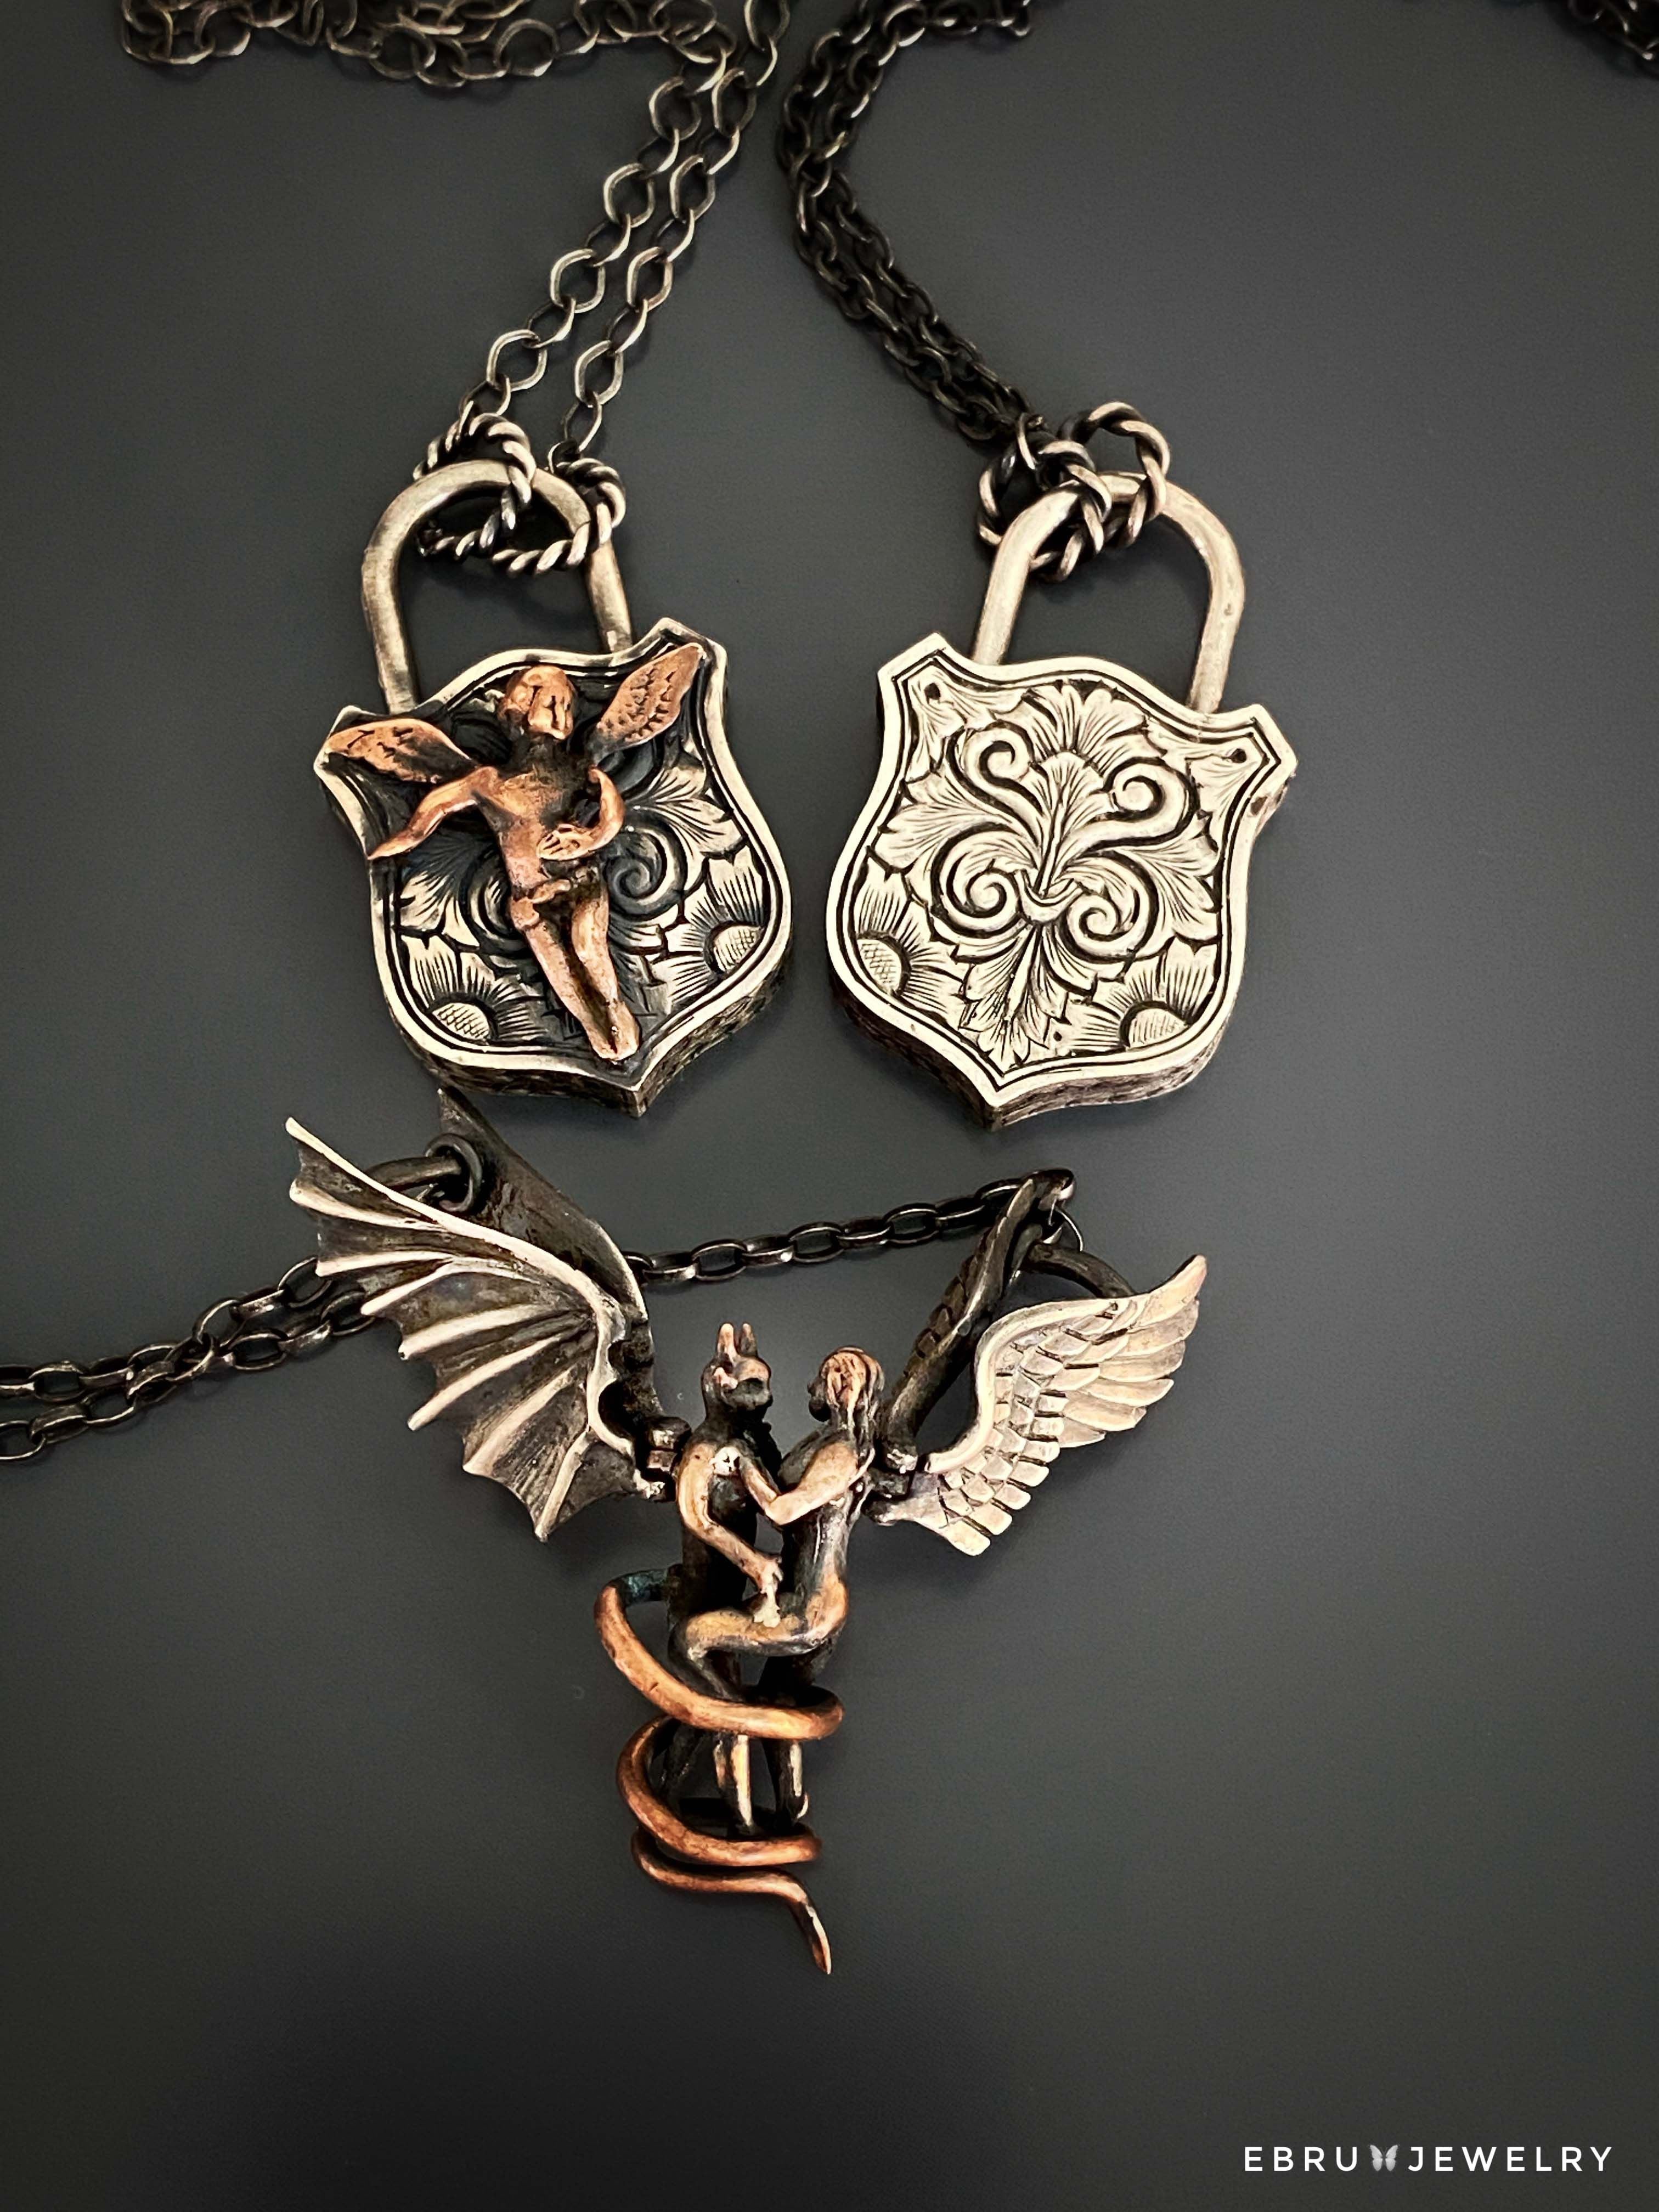 Layer the Angel Lock Necklace with other necklaces for a trendy look or wear it alone as a cherished and meaningful piece